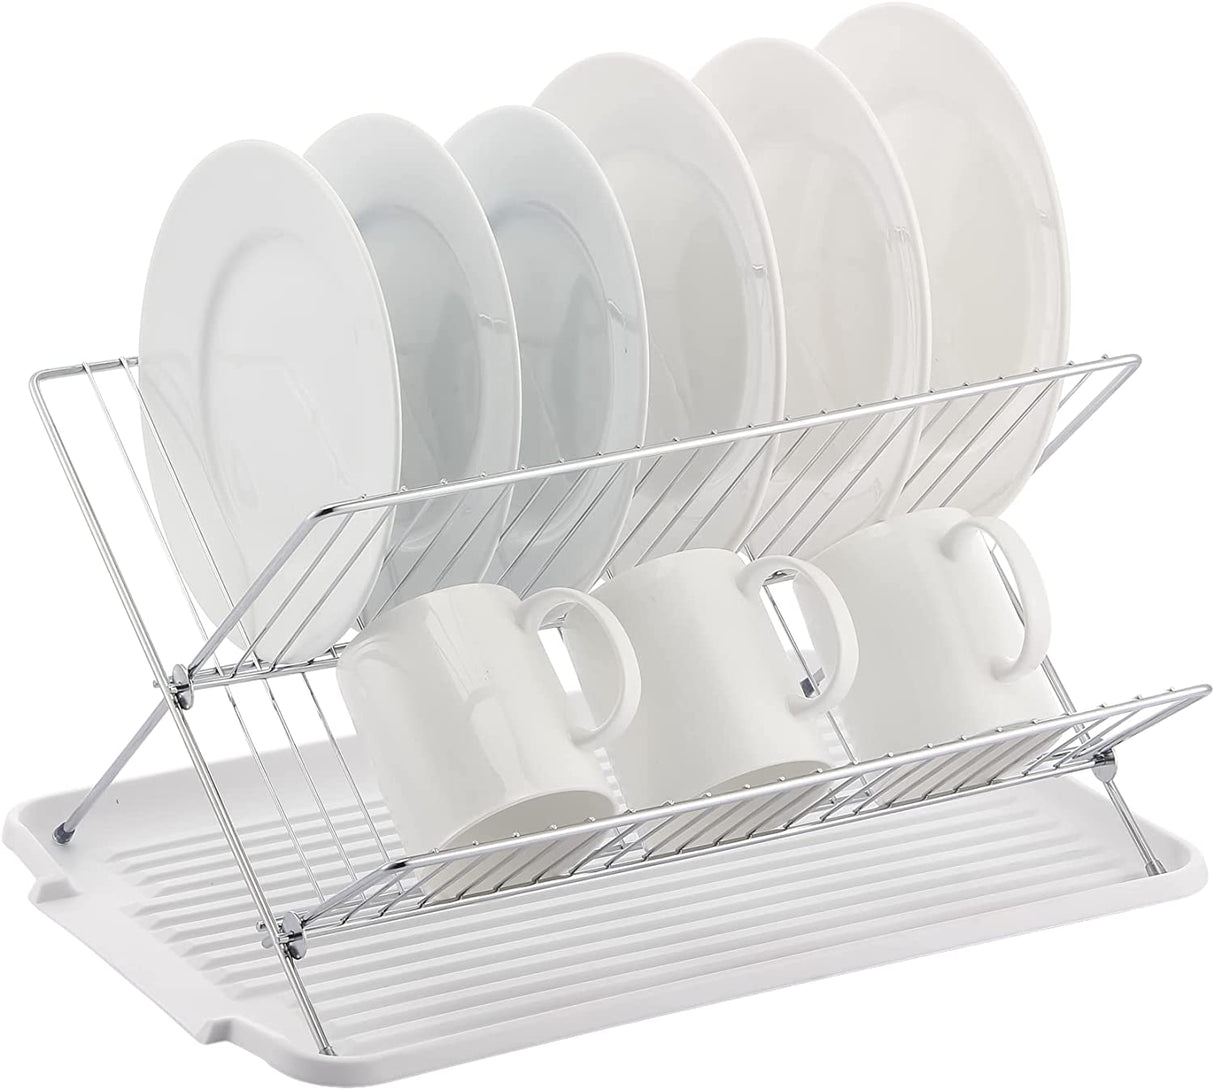 J&V Textiles 17 in. x Shaped Stainless Steel 2-Tier Dish Rack for Kitchen Counter, White